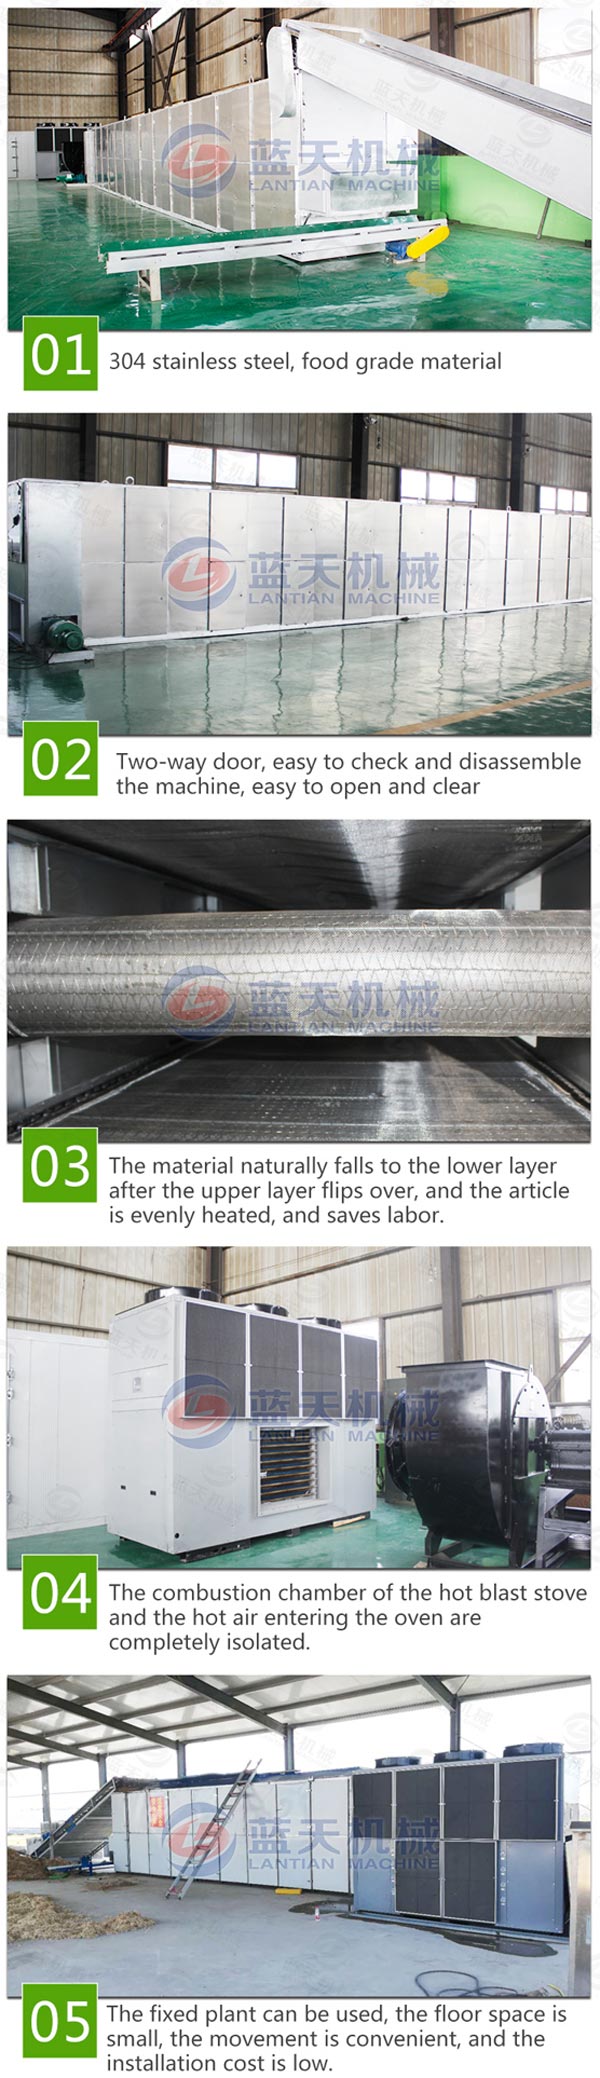 Features of our vegetable dryer